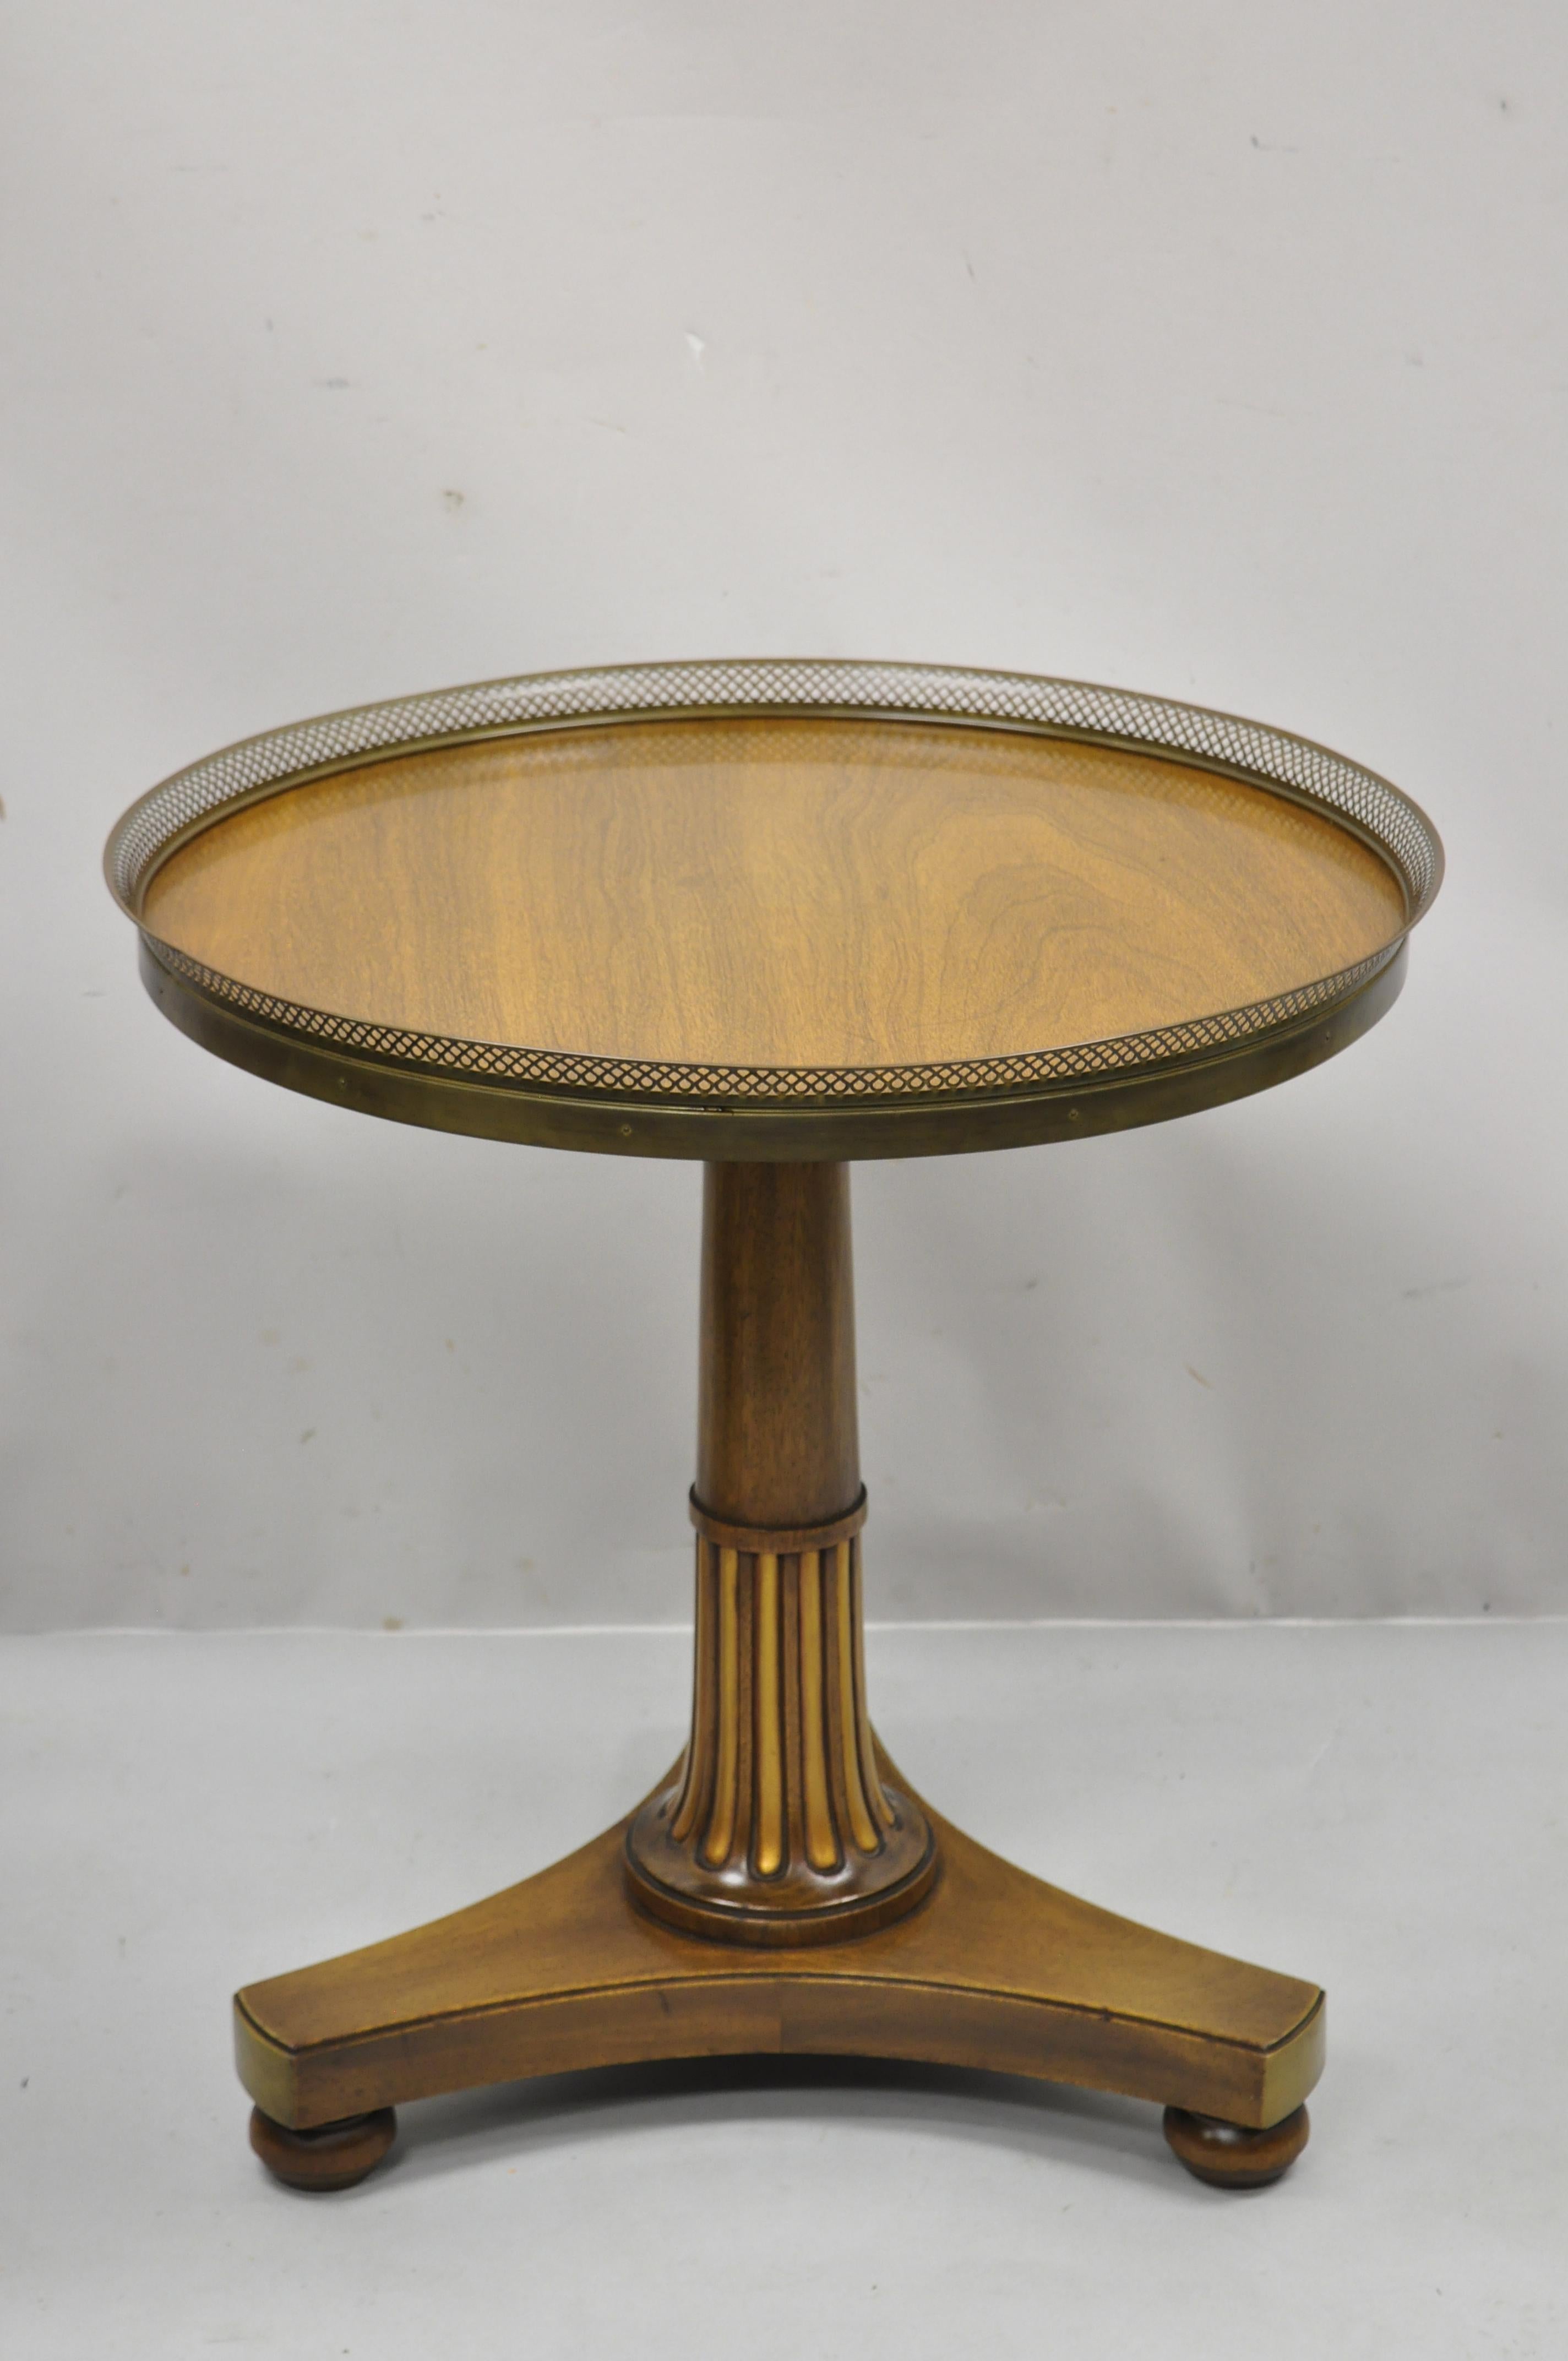 Vintage French Empire mahogany pedestal base round accent center table with brass gallery. Item features pierced brass gallery, pedestal base, gold gilt details, beautiful wood grain, quality American craftsmanship, great style and form. Circa mid